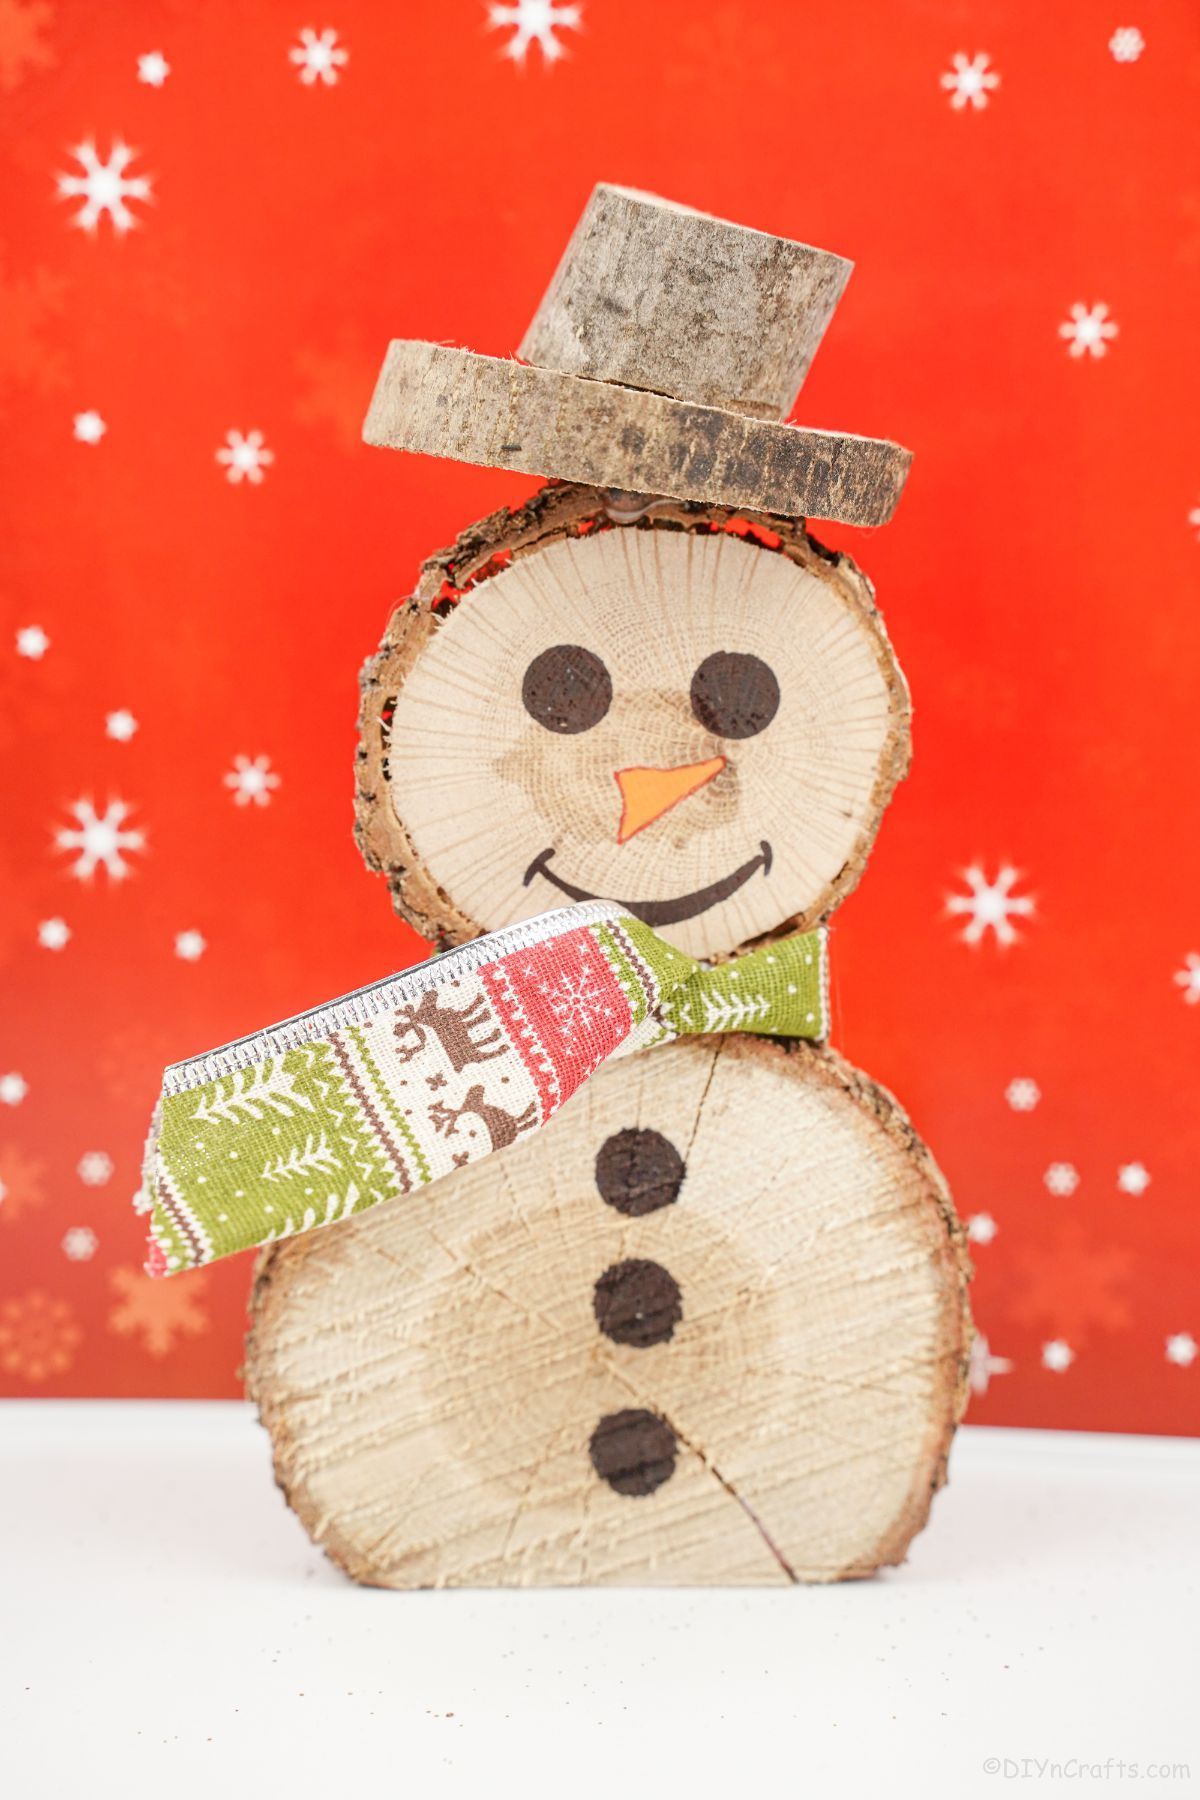 wood slice snowman on white table with red background